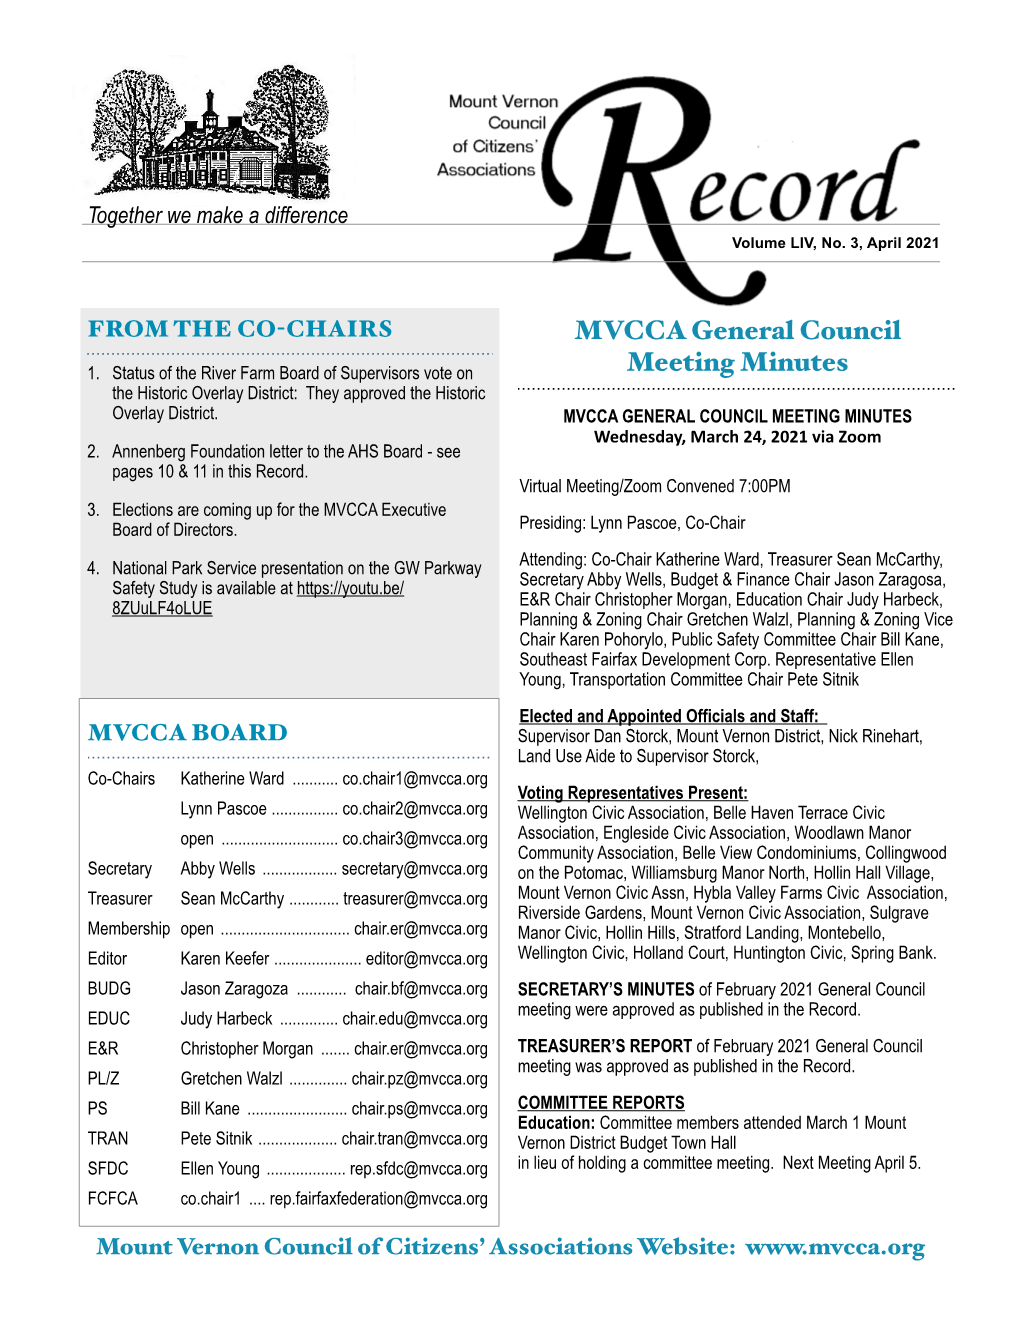 MVCCA GENERAL COUNCIL MEETING MINUTES Wednesday, March 24, 2021 Via Zoom 2